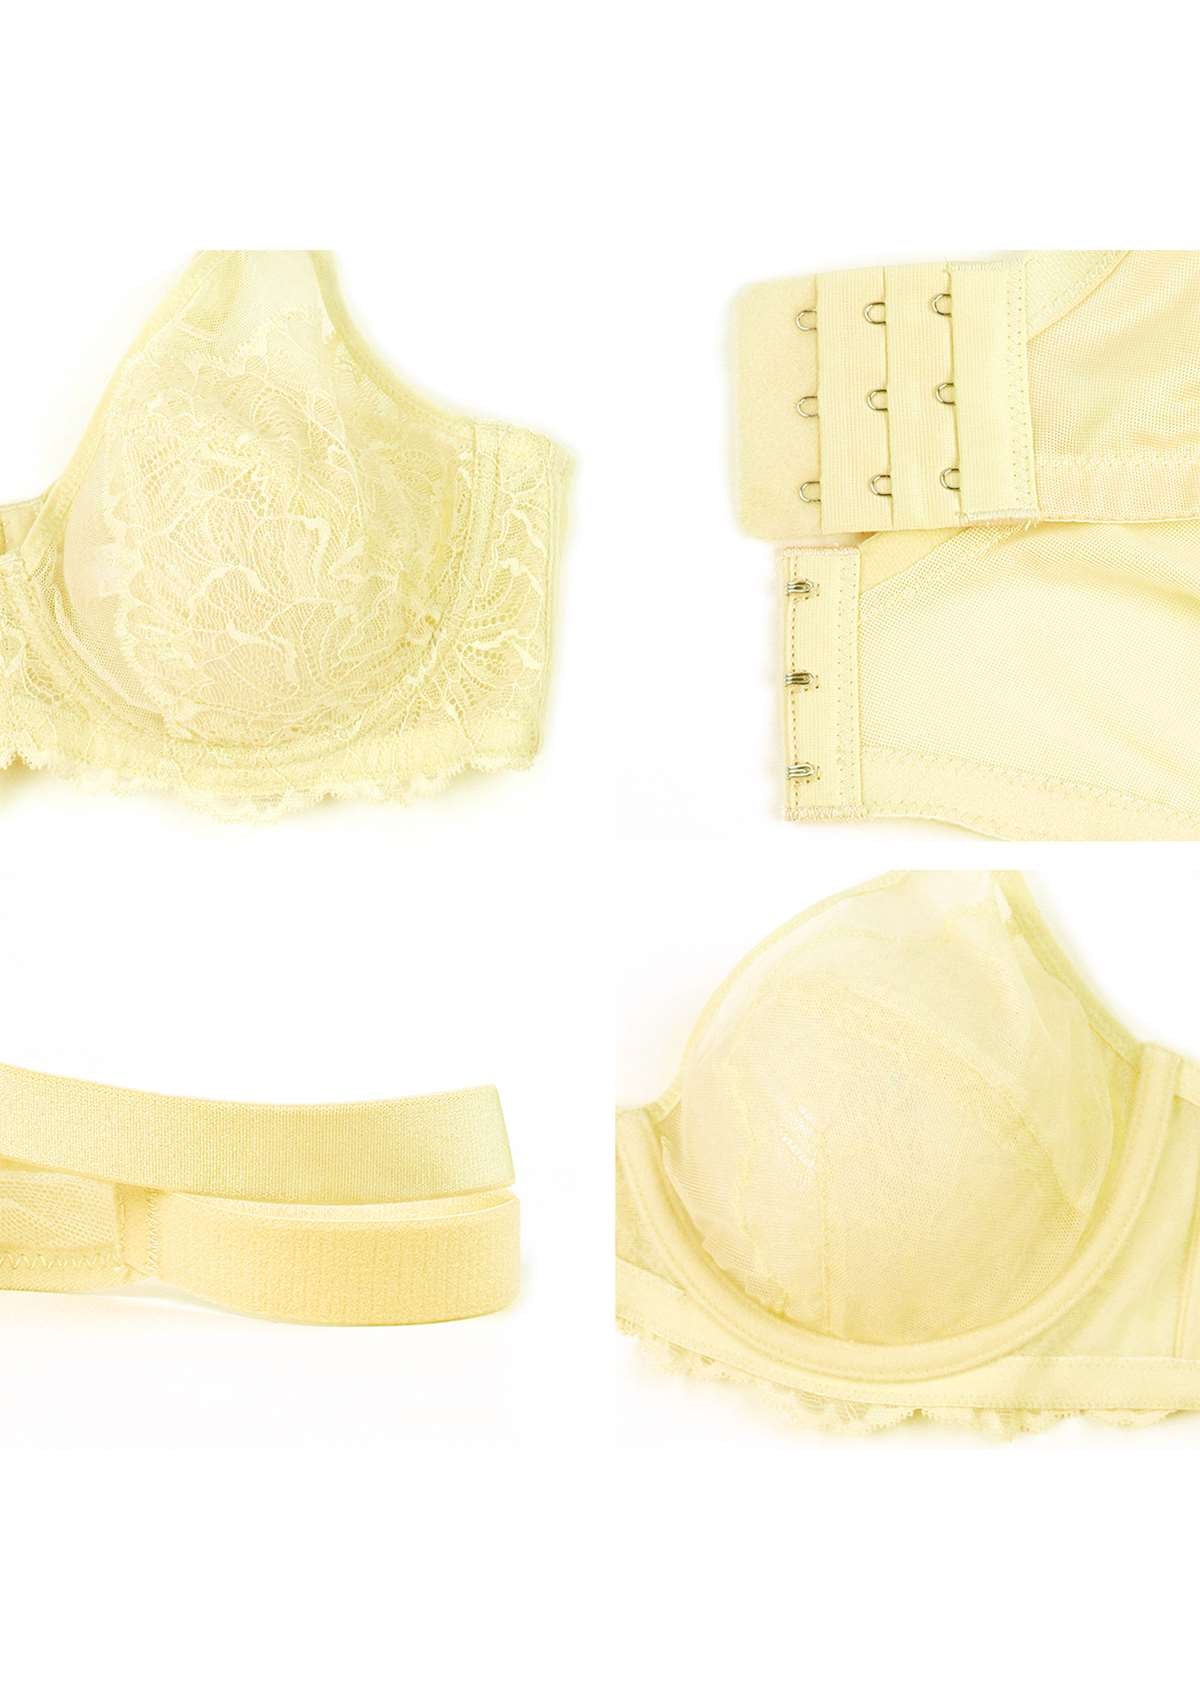 HSIA Blossom Full Coverage Side Support Bra: Designed For Heavy Busts - Beige / 36 / C